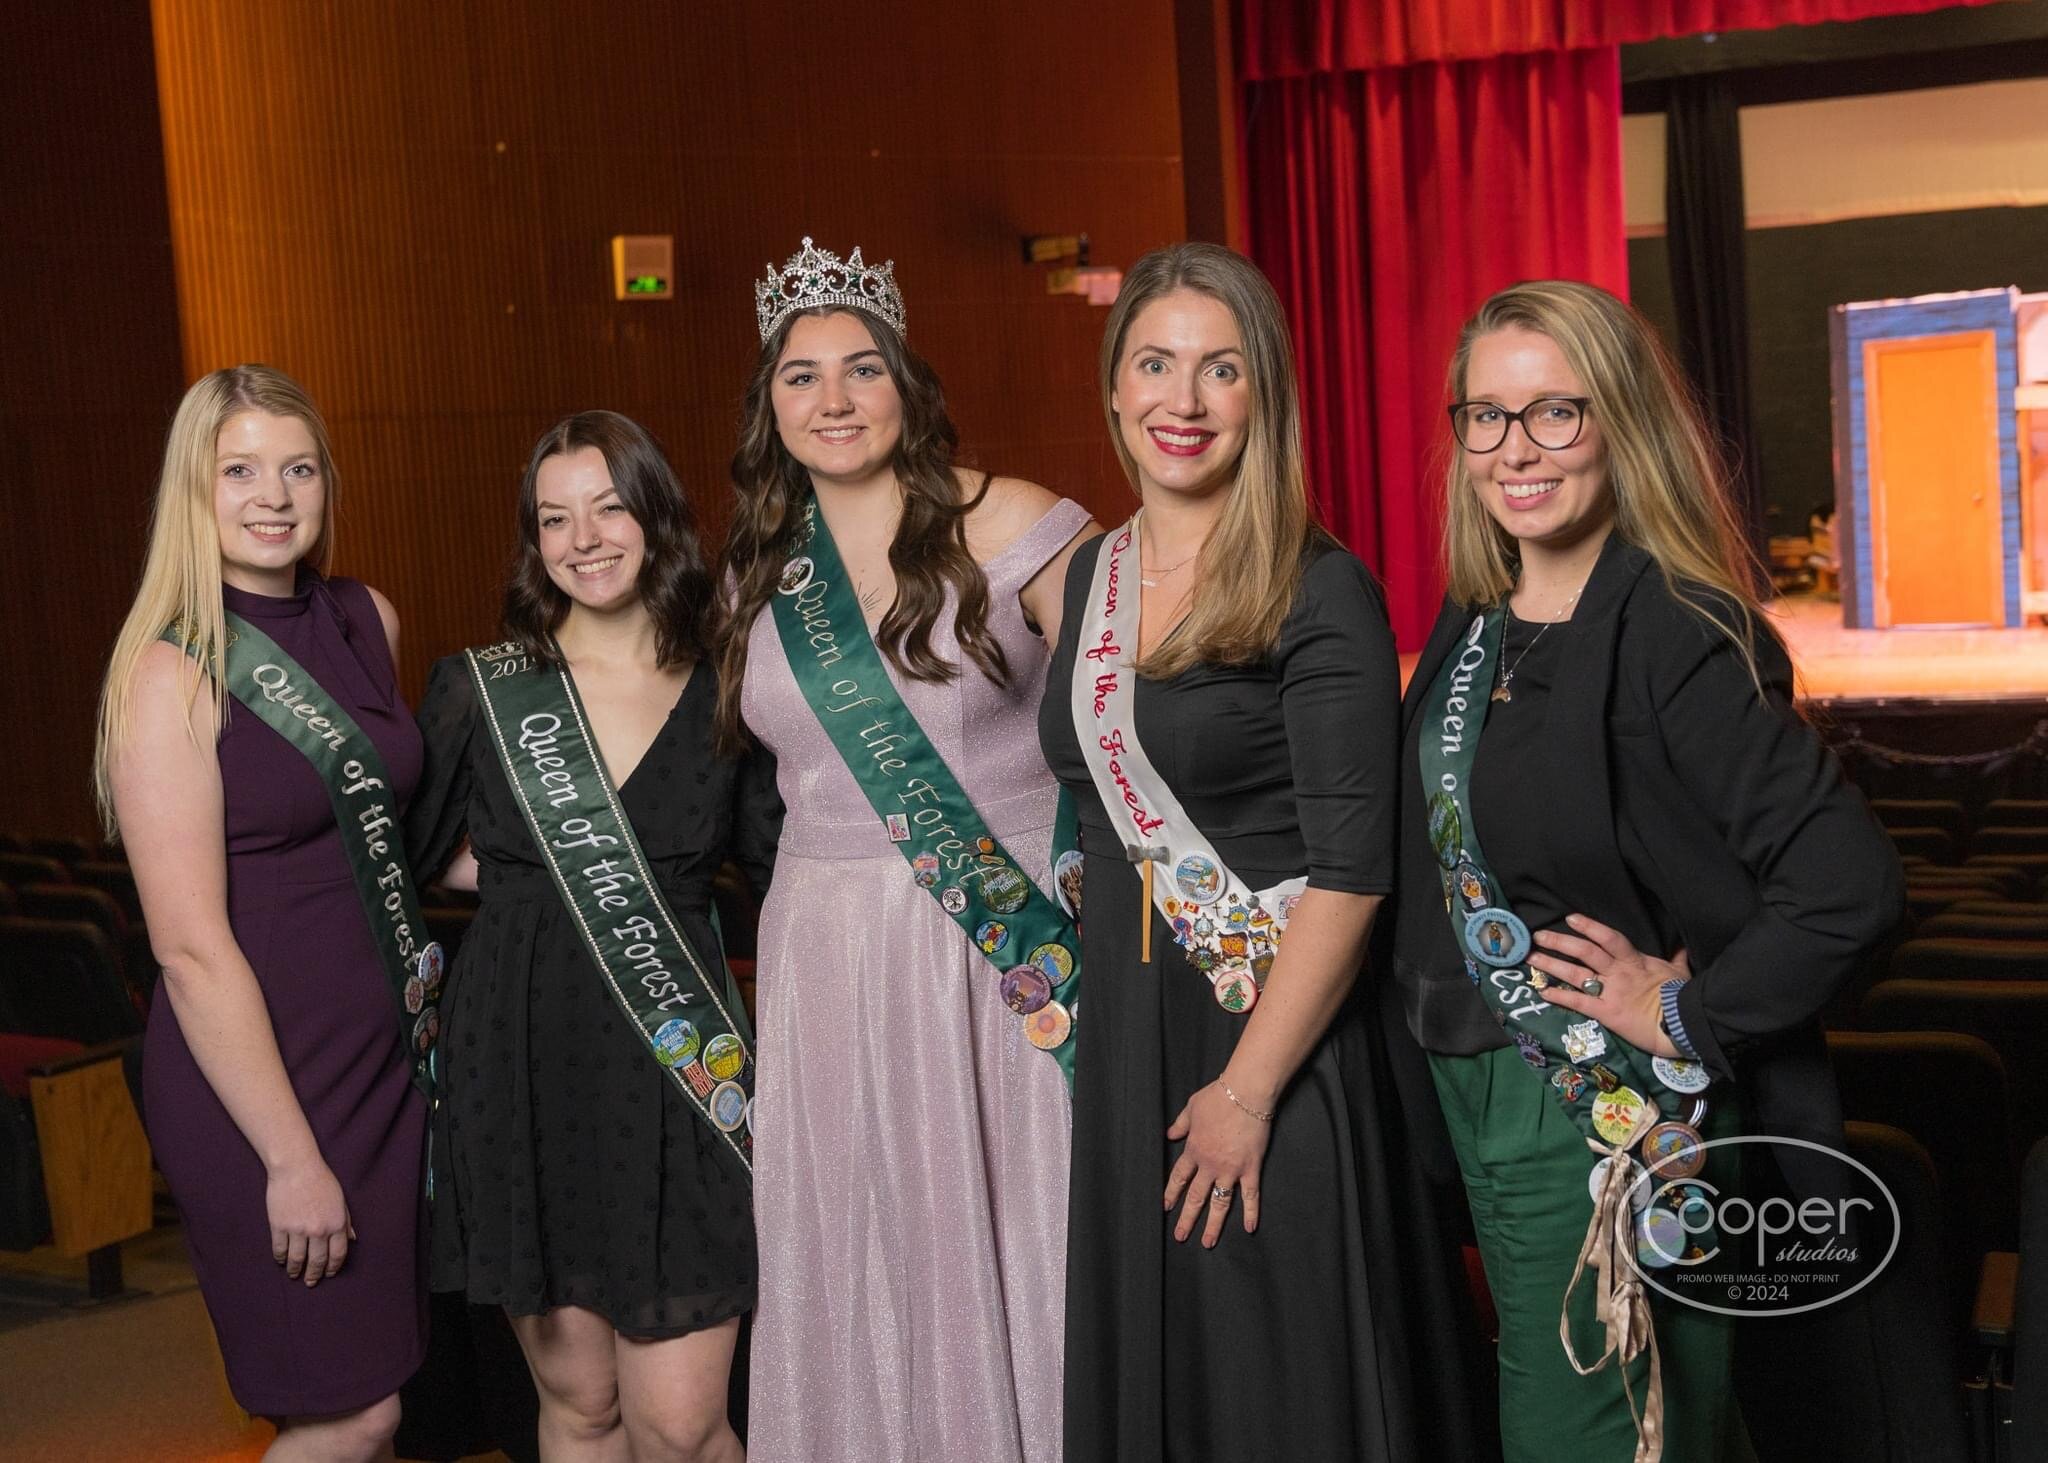 THANK YOU PAST QUEENS! Thank you to the former Queens of the Forest who helped make Coronation this year possible. 
1999 Queen - Hannah Blomberg 
2012 Queen - Brianna Eddy
2013 Queen - Alyssia Castro
2014 Queen - Anna Liljas 
2018 Queen - Jessica Shr